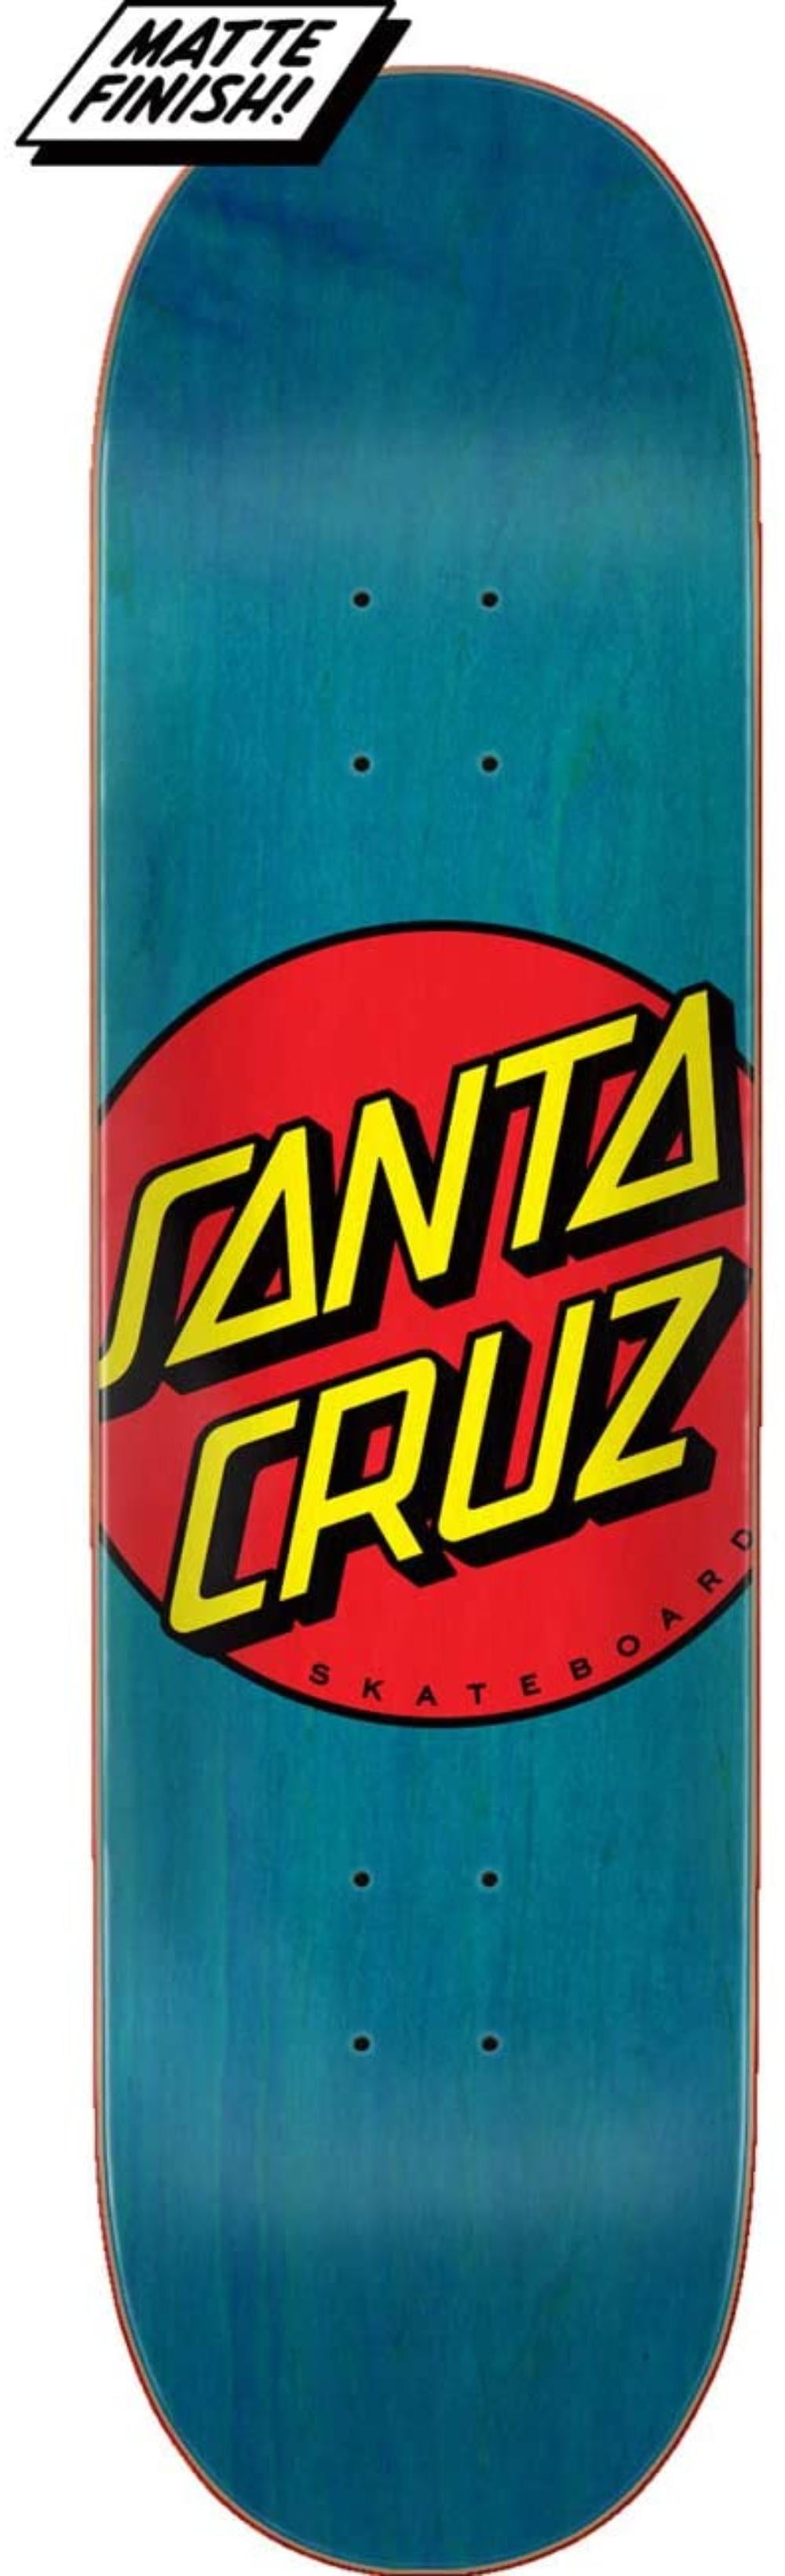 Details about   Santa Cruz Skateboard Old School Shape 29X 8.79 Classic SC Decals And T Tool 